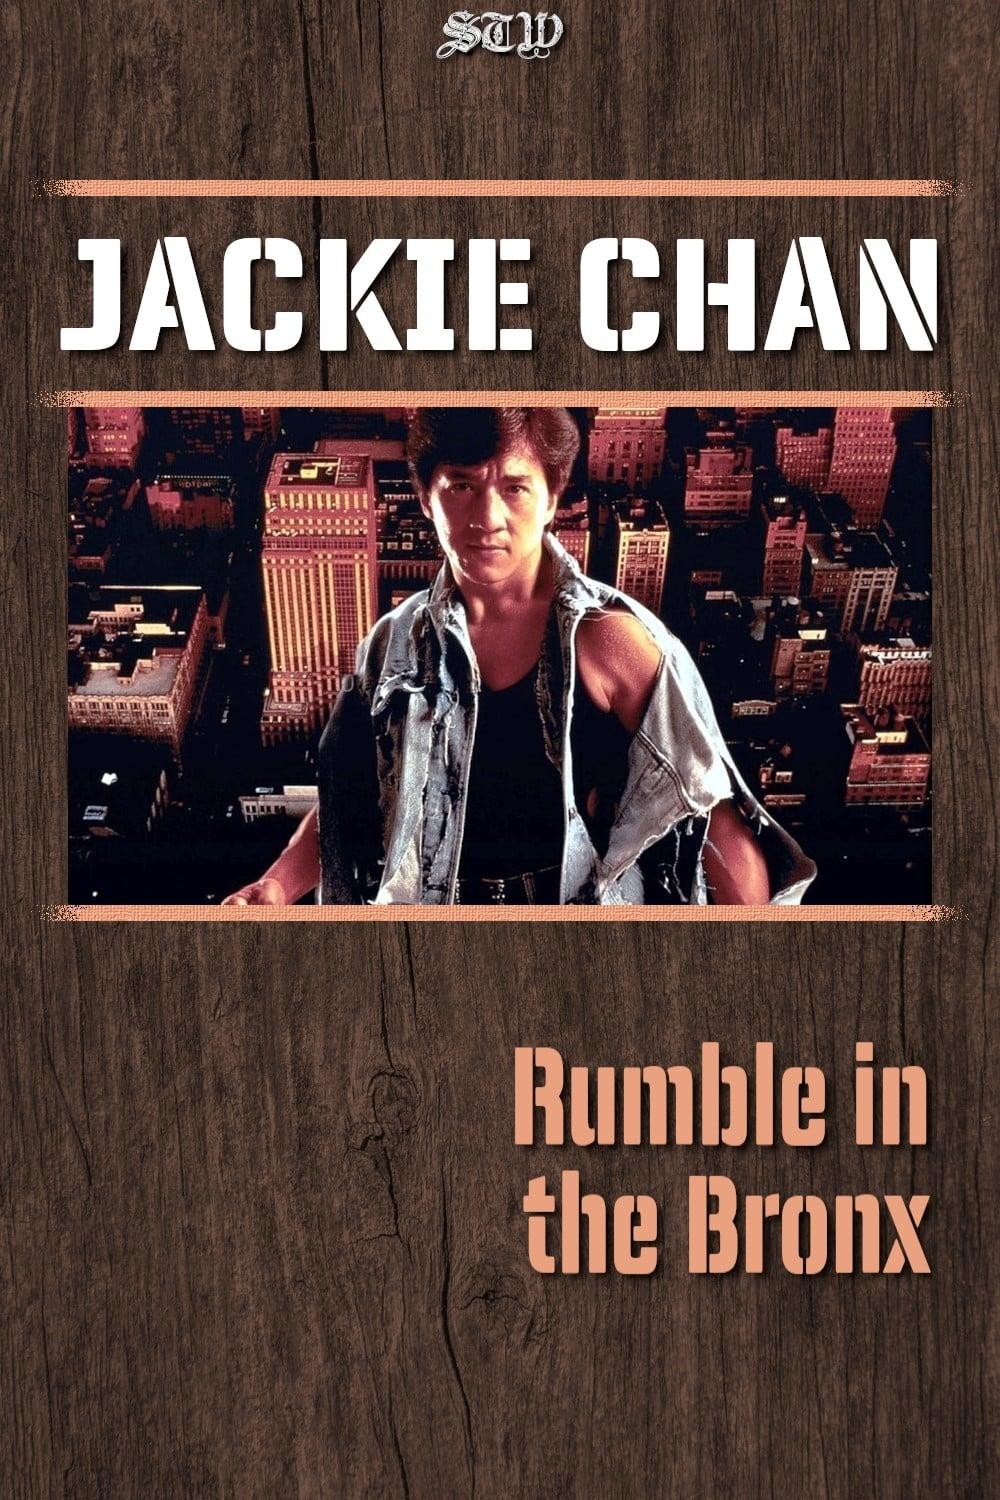 Rumble in the Bronx poster